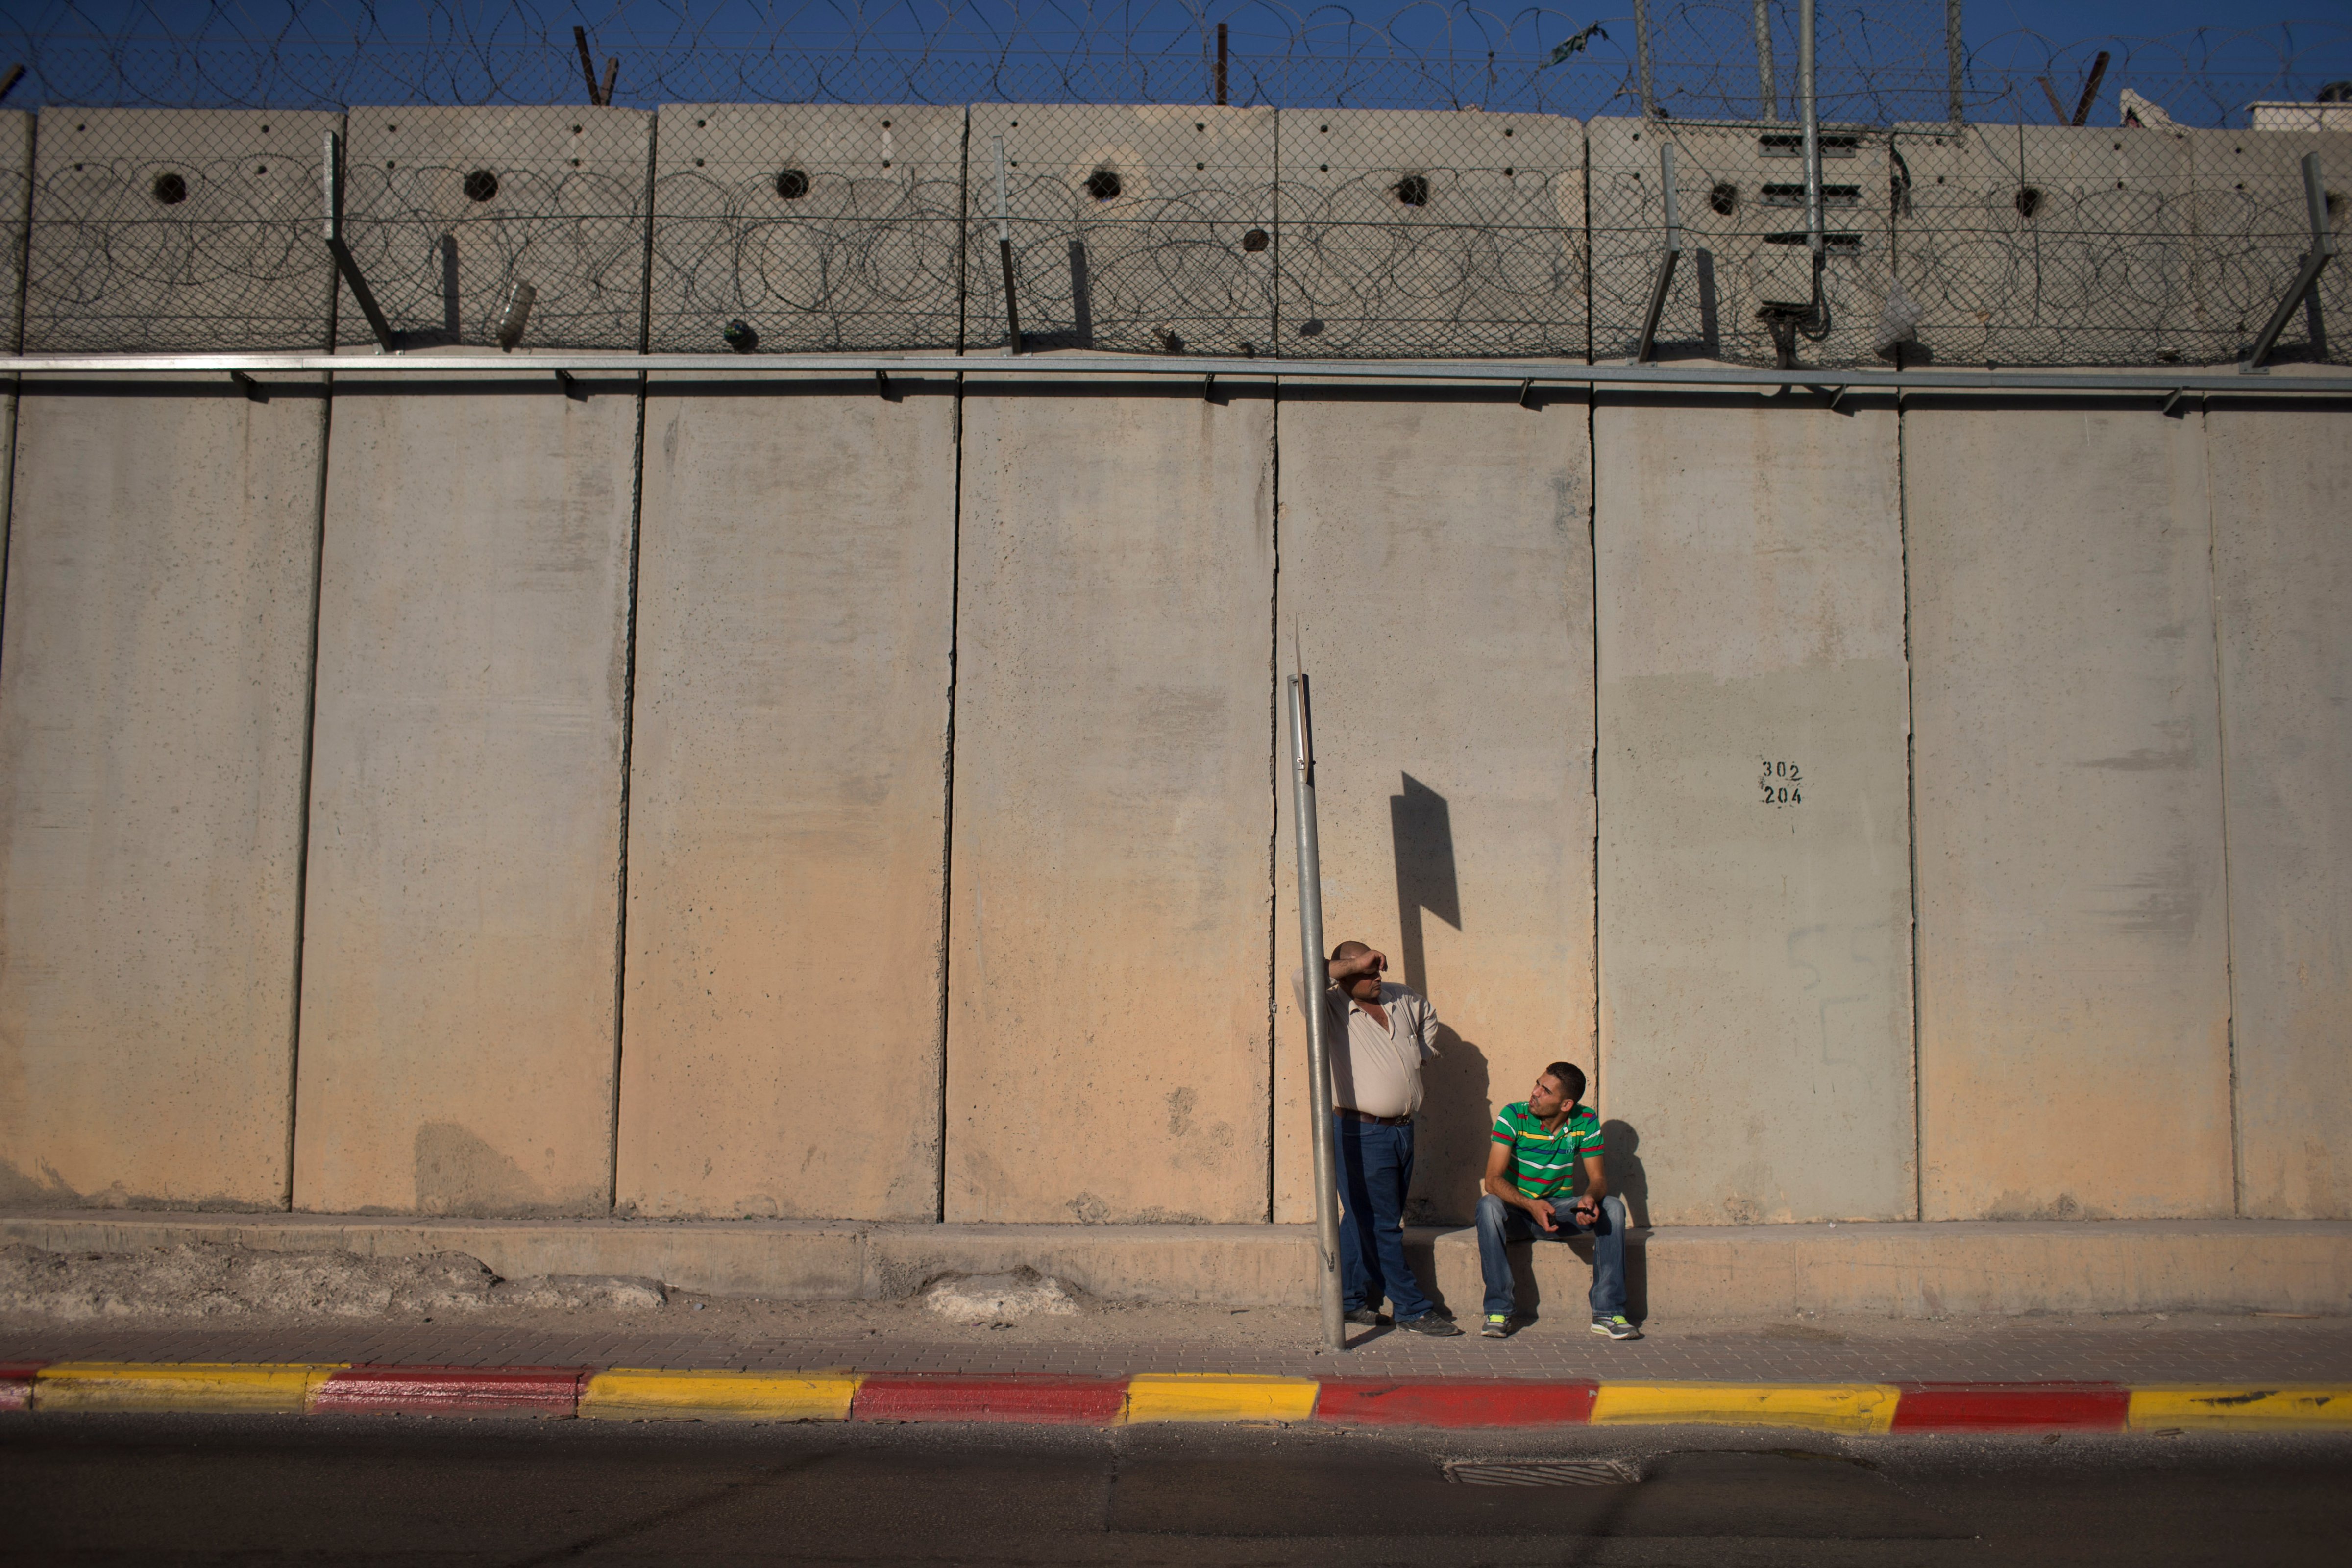 Palestinian men wait for a bus along the Israeli West Bank barrier on the outskirts of Jerusalem on September 12, 2013 in Aram, West Bank. (Uriel Sinai—Getty Images)